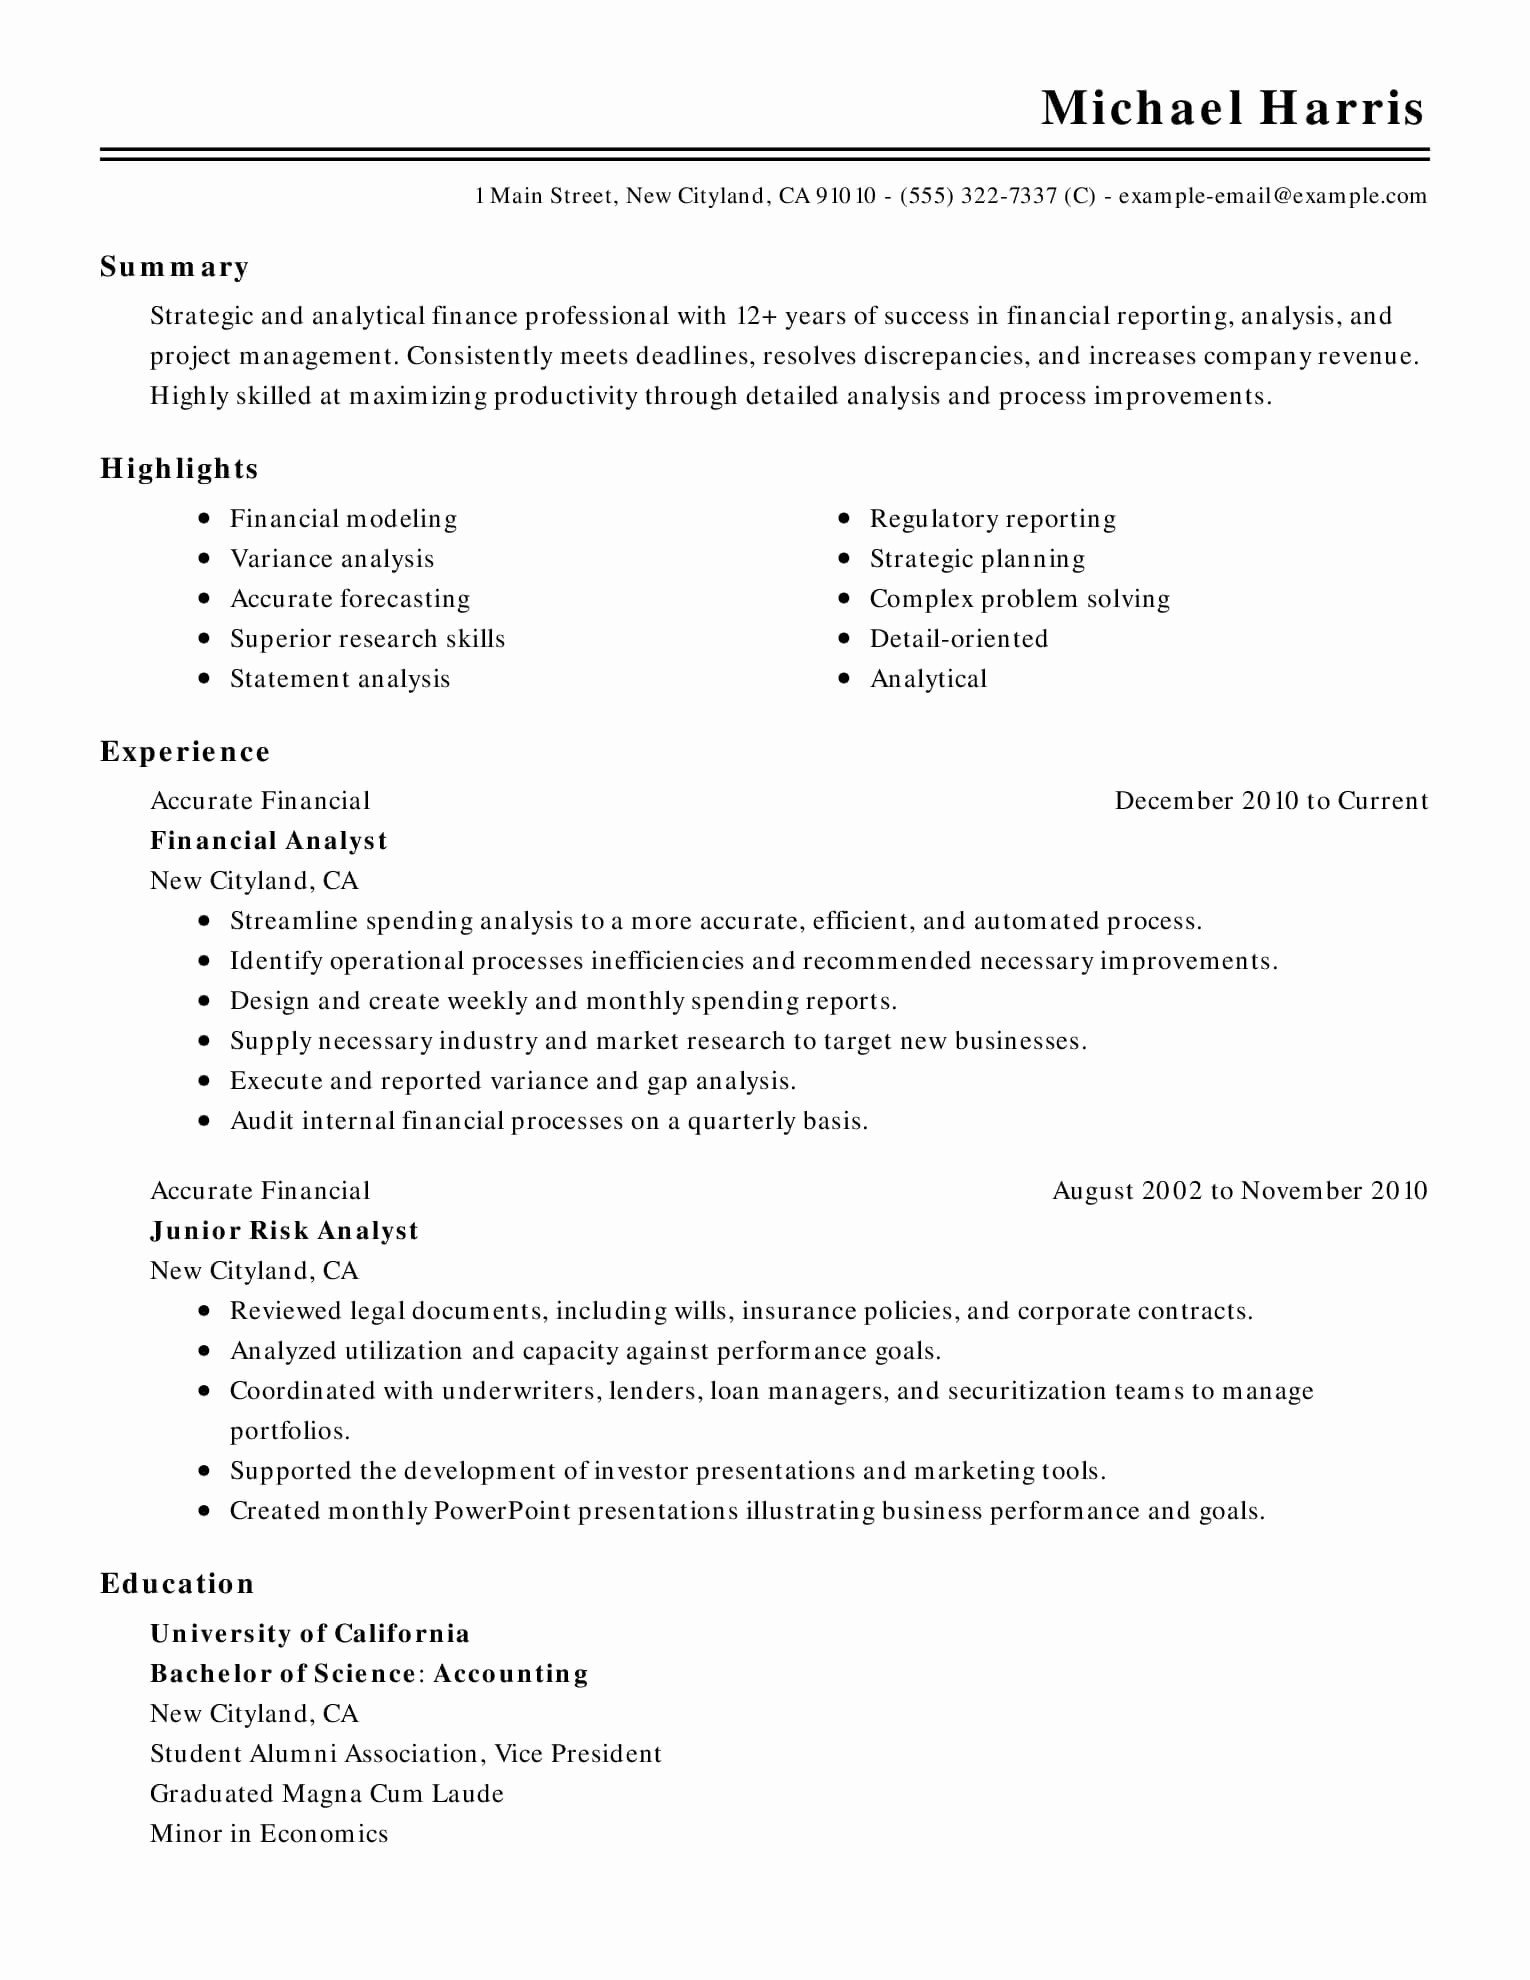 Resume Template On Microsoft Word Fresh 15 Of the Best Resume Templates for Microsoft Word Fice